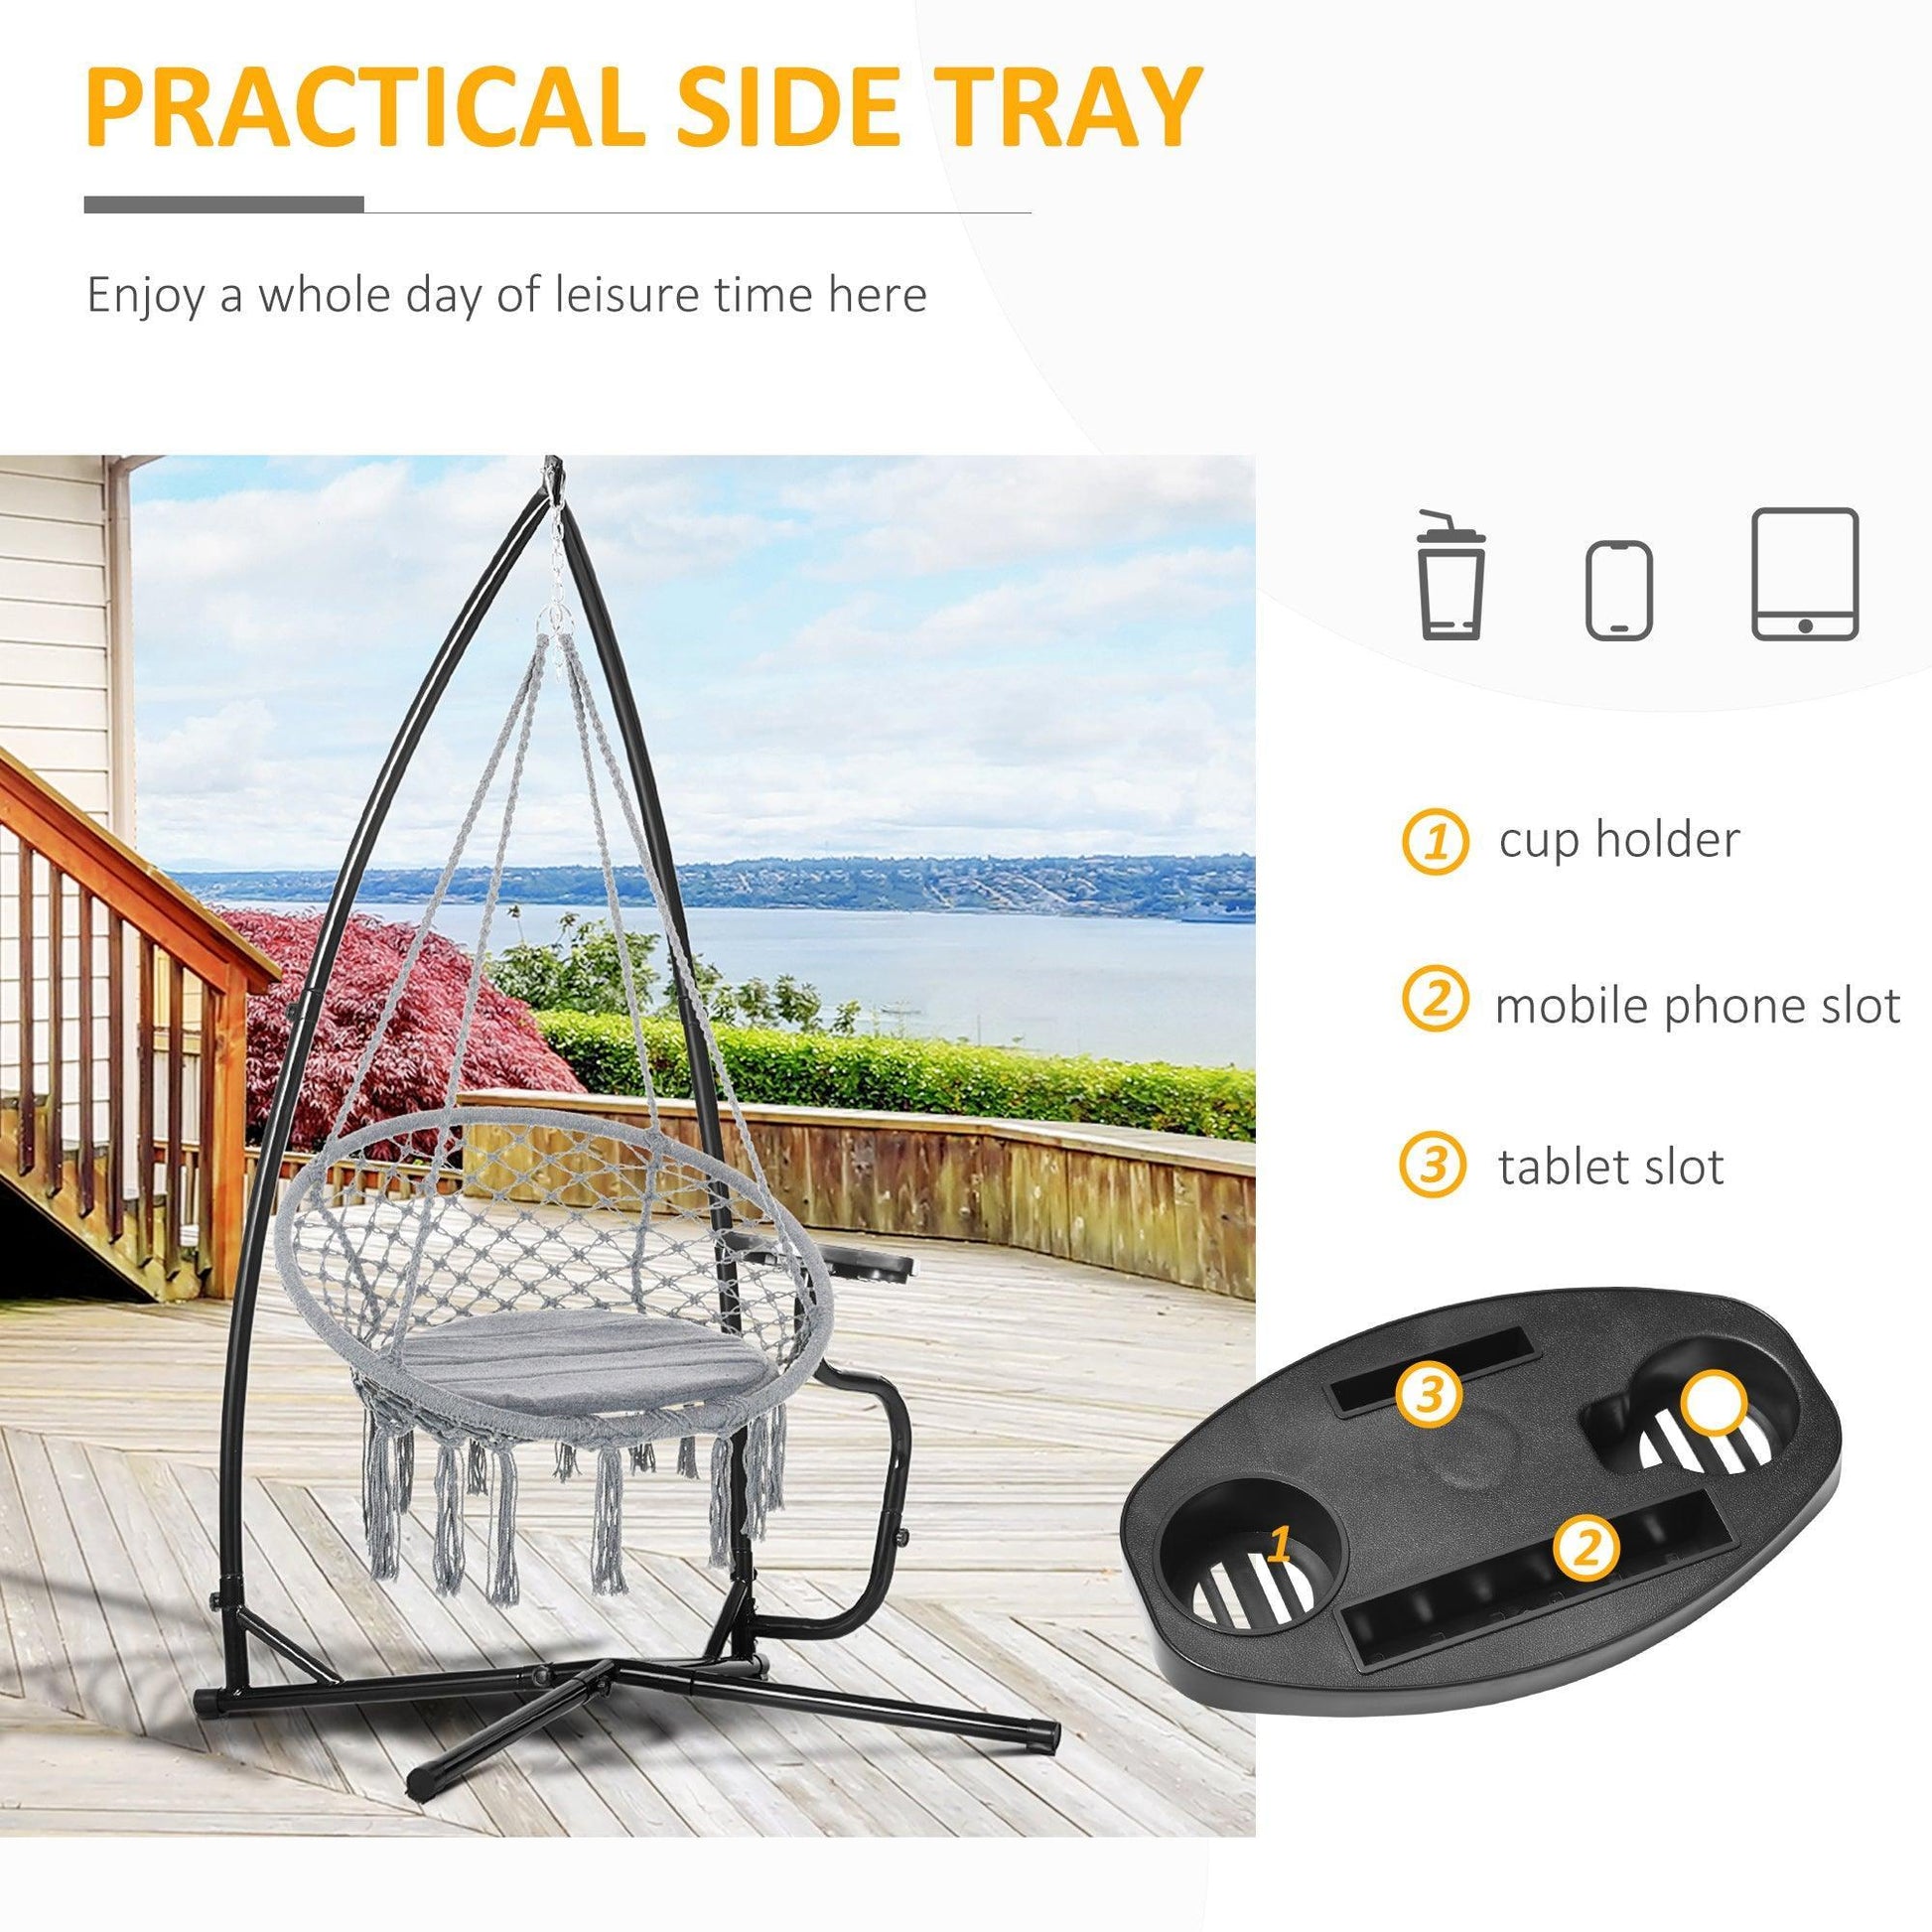 Outsunny Heavy Duty Metal C-Stand for Hammock Chair - ALL4U RETAILER LTD